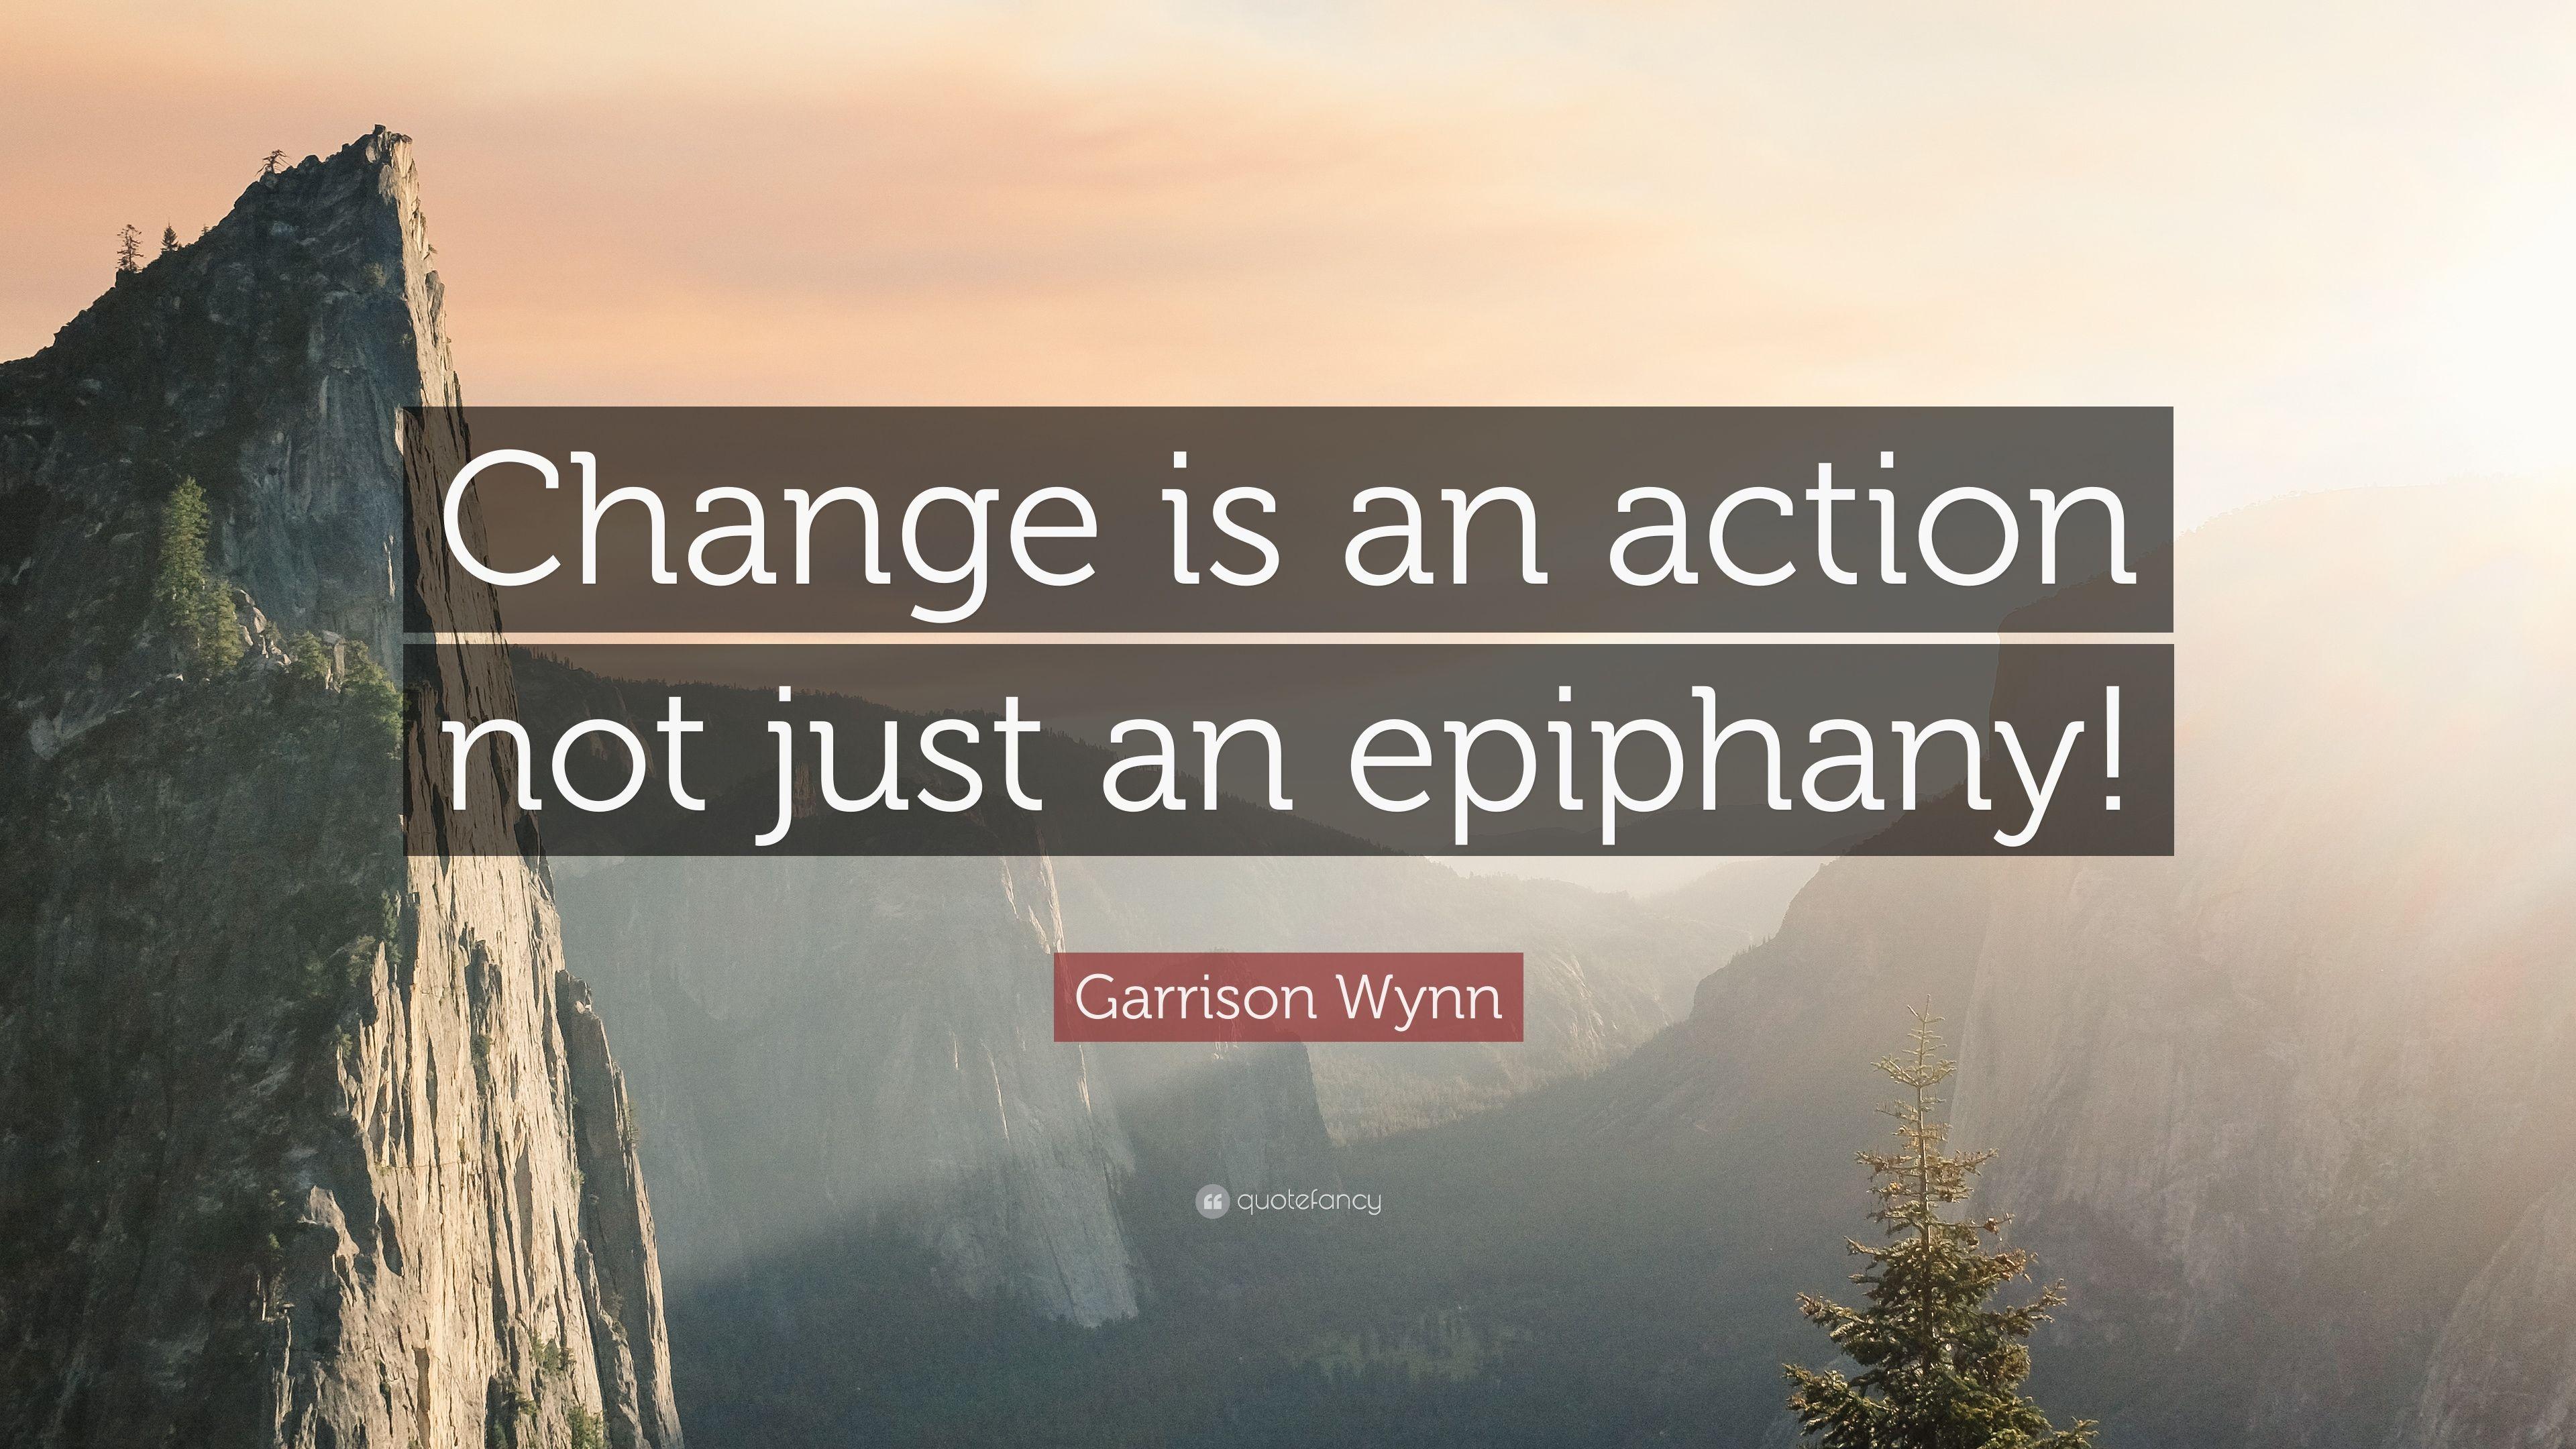 Garrison Wynn Quote: “Change is an action not just an epiphany!” 7